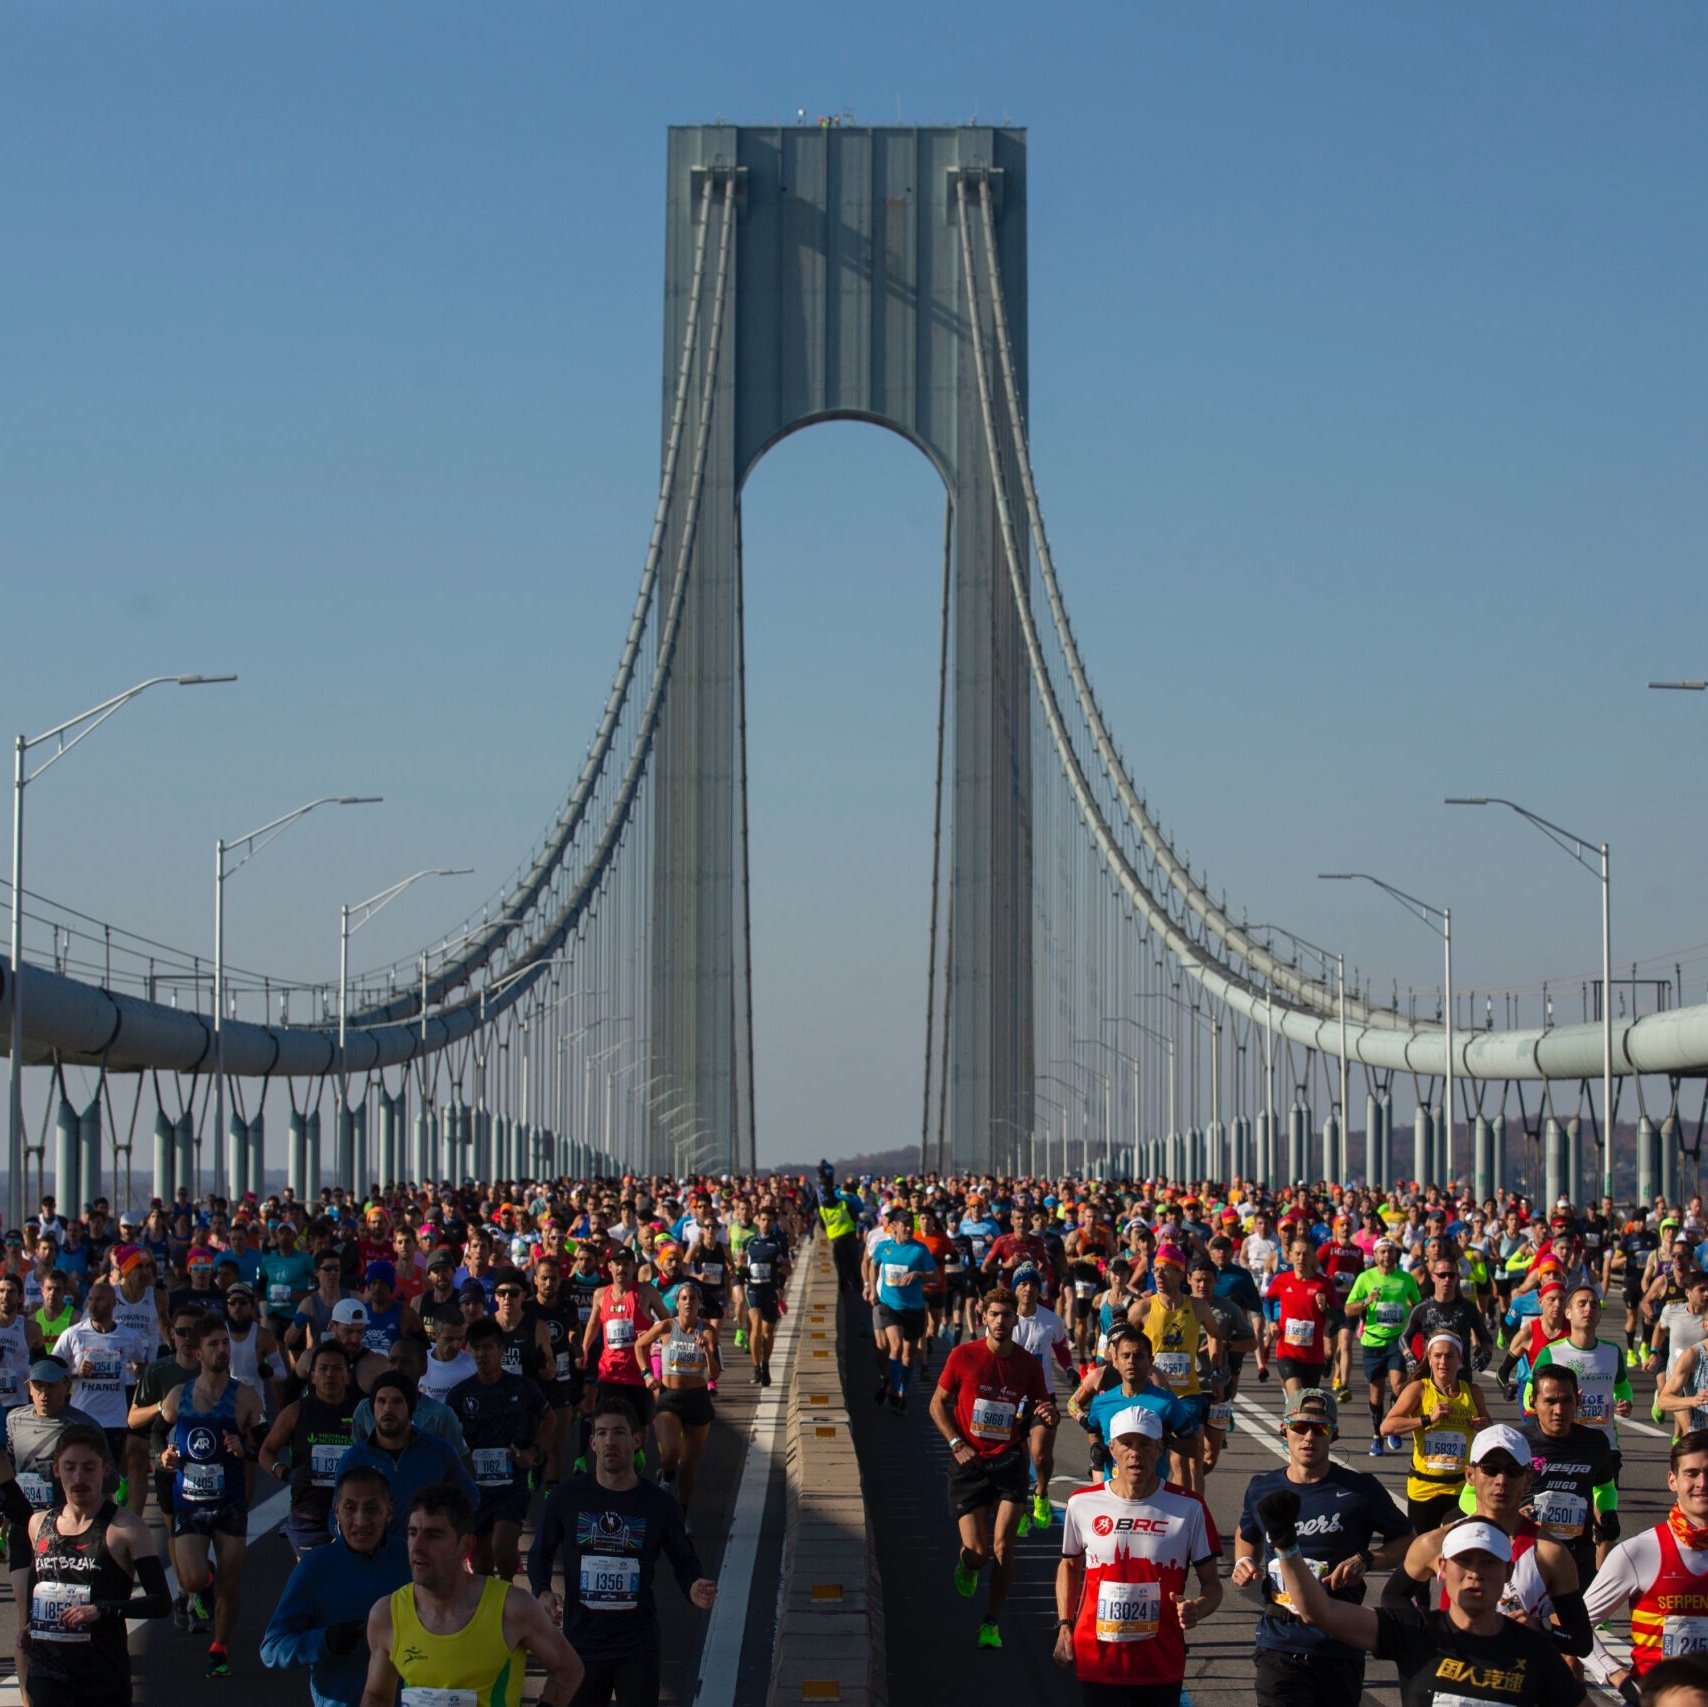 Benjamin Norman’s NYC Marathon Photo Makes the Front Page of the New York Times